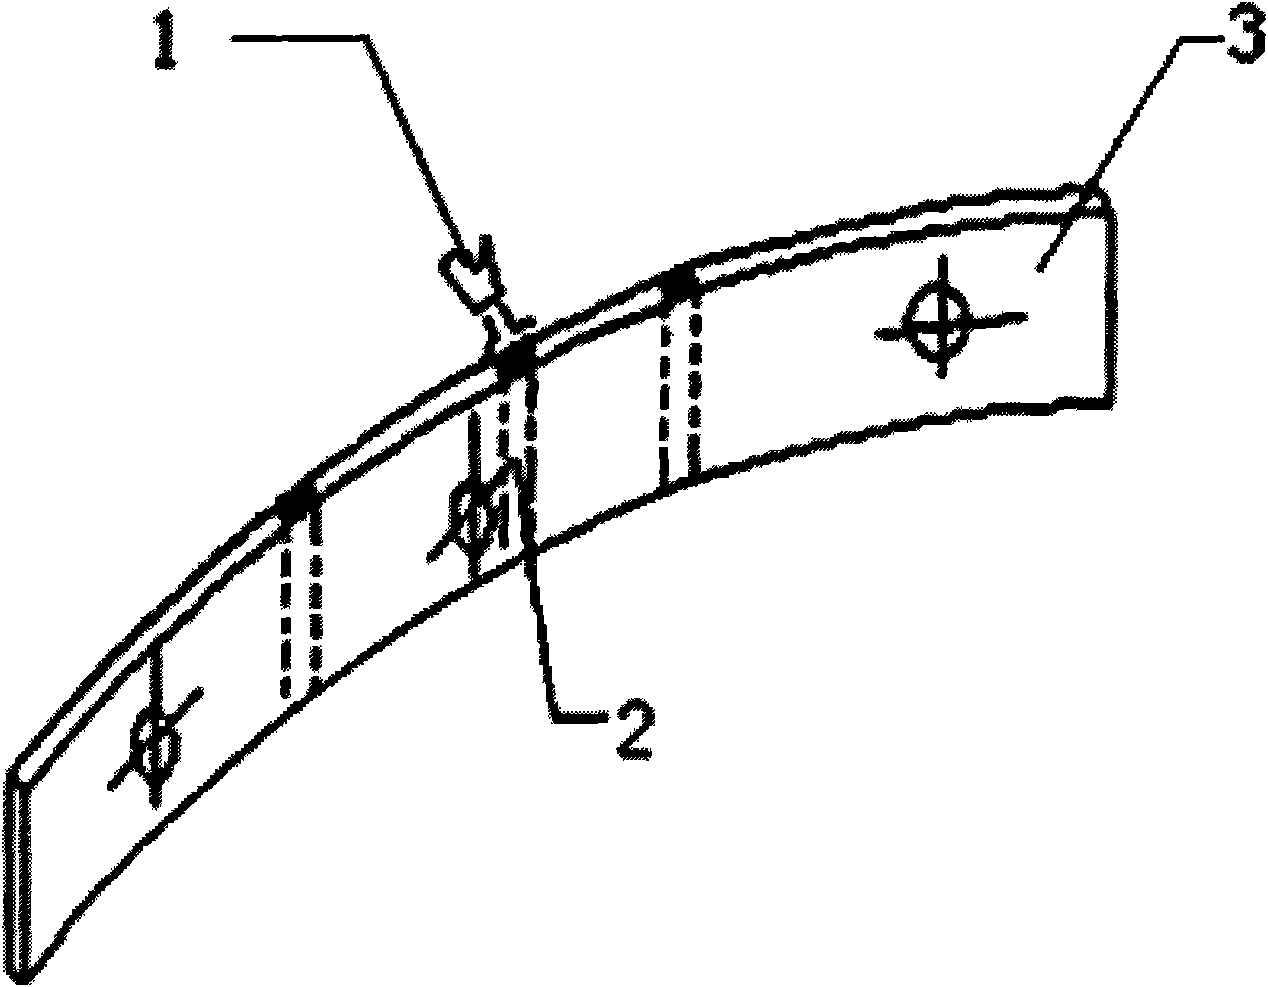 Flame shaping method for side bending deformation of transformer core clamping piece